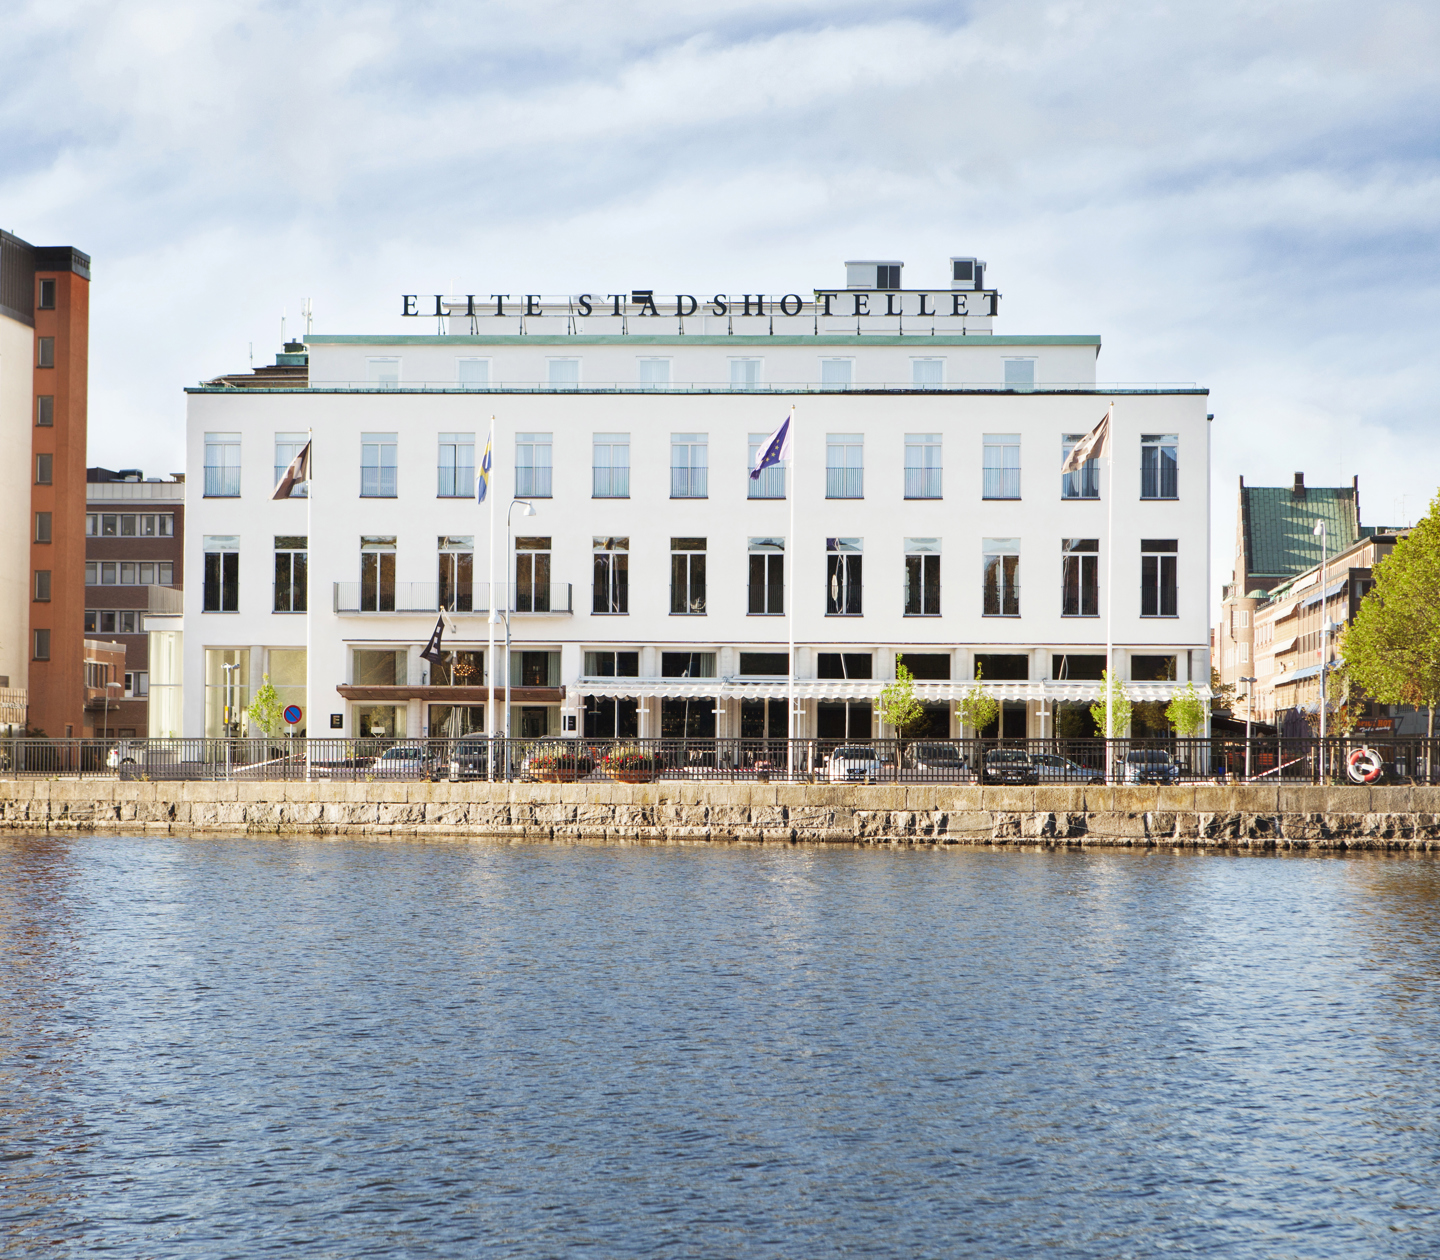 The grand facade of the Elite Stadshotellet with the Eskilstuna River in front